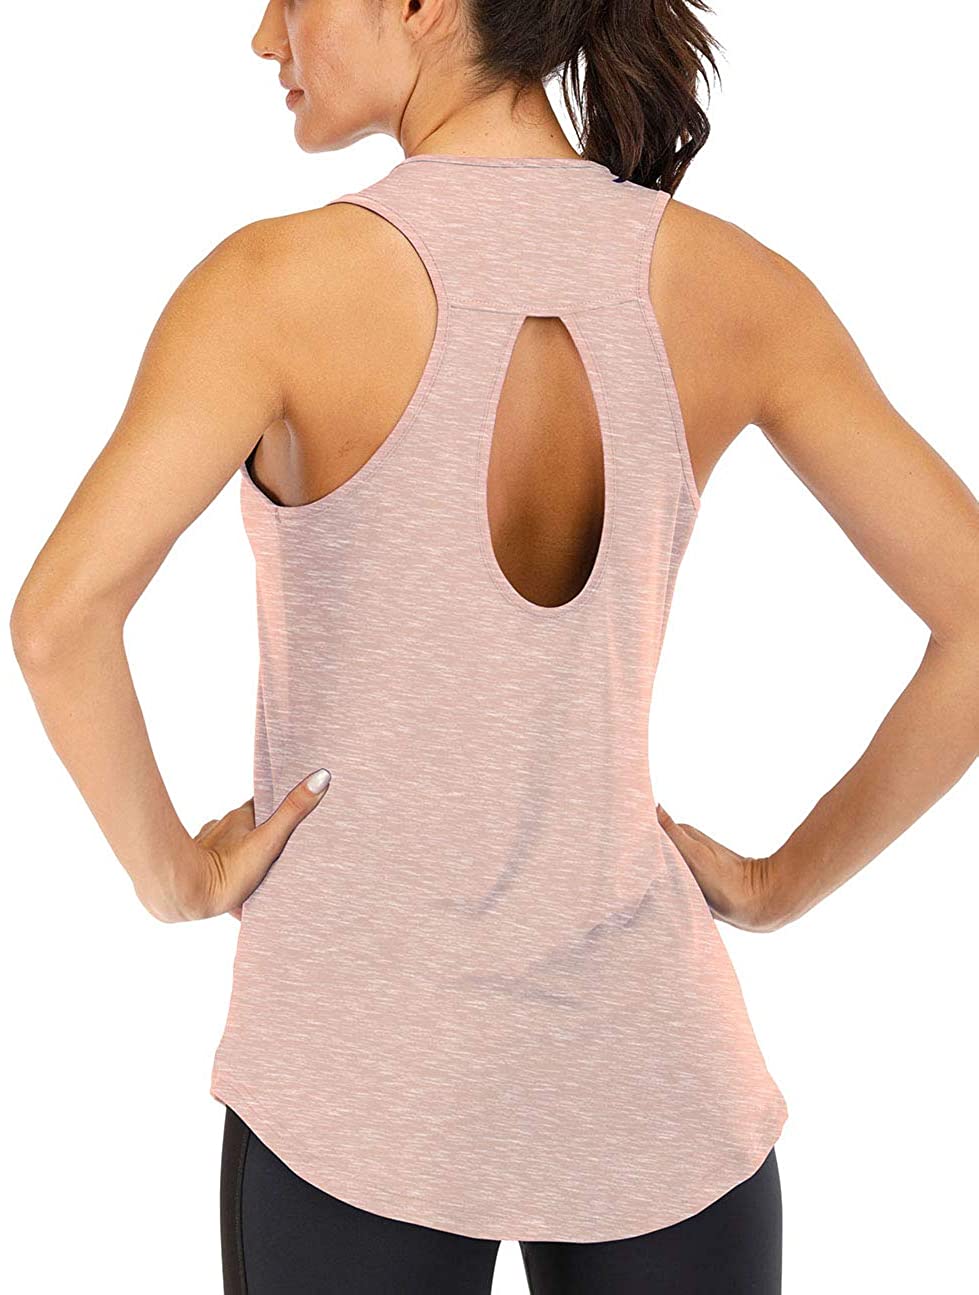 Fihapyli ICTIVE Long Sleeve Workout Shirts for Women Loose fit Yoga Shirts for Women Backless V Neck Running Shirts 